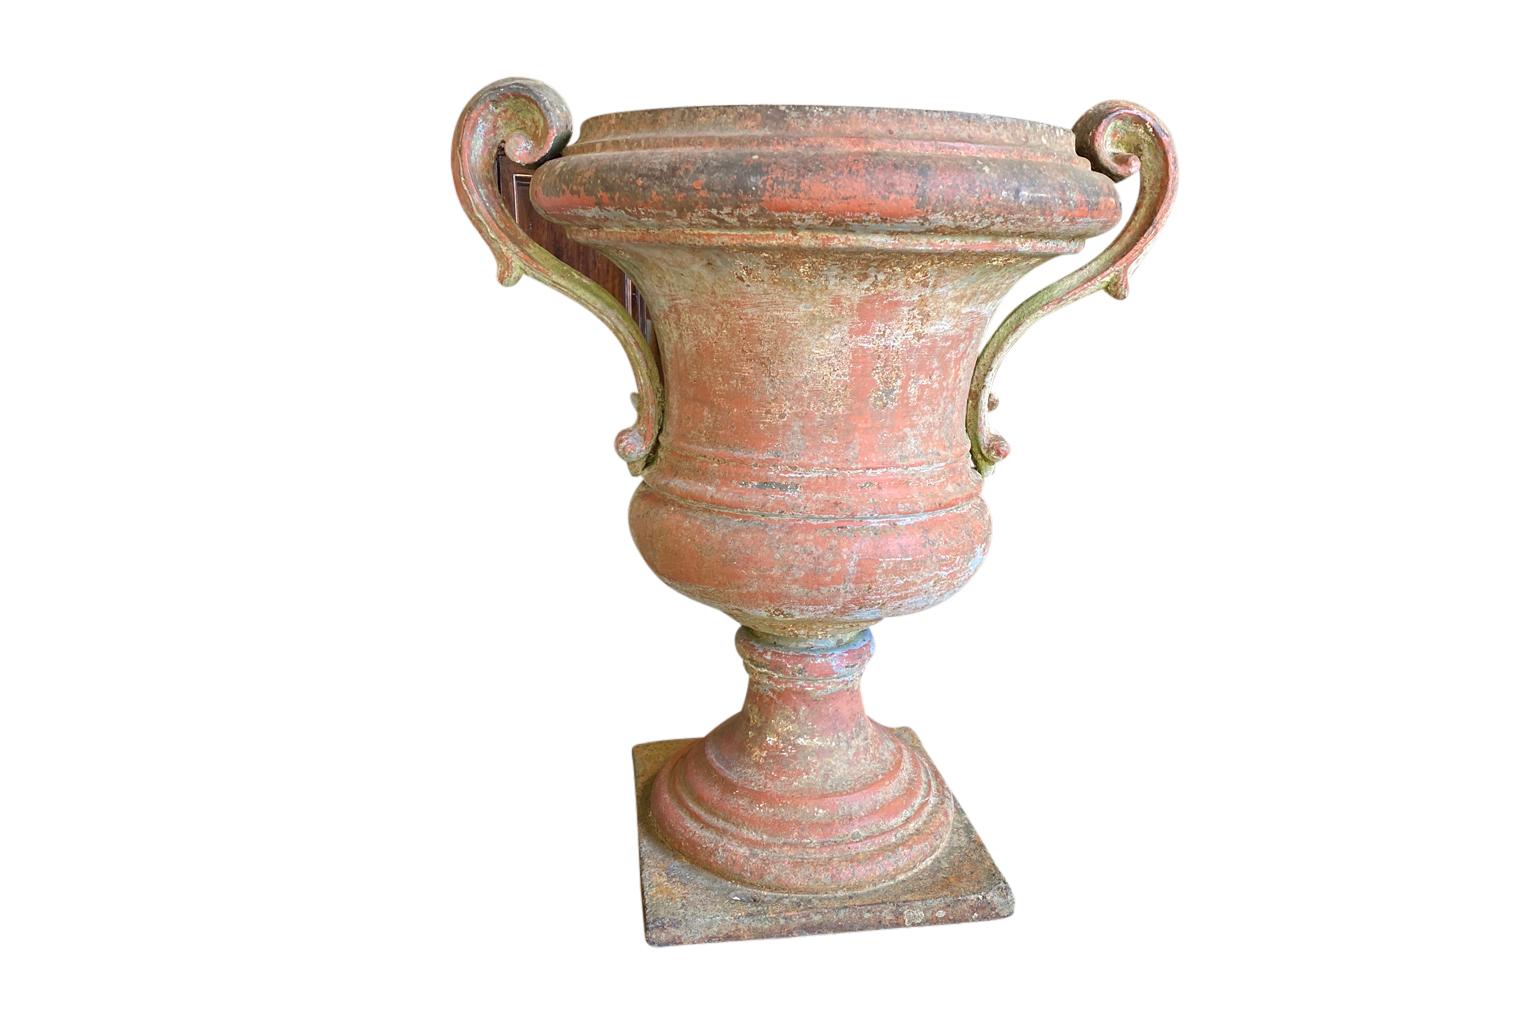 A stunning 18th century Medeci Urn from Florence, Italy. Beautifully cast in iron with a very beautiful finish in tones of sienna and light moss green. Wonderful minimalist lines with outstanding patina. Perfect for any interior or exterior.